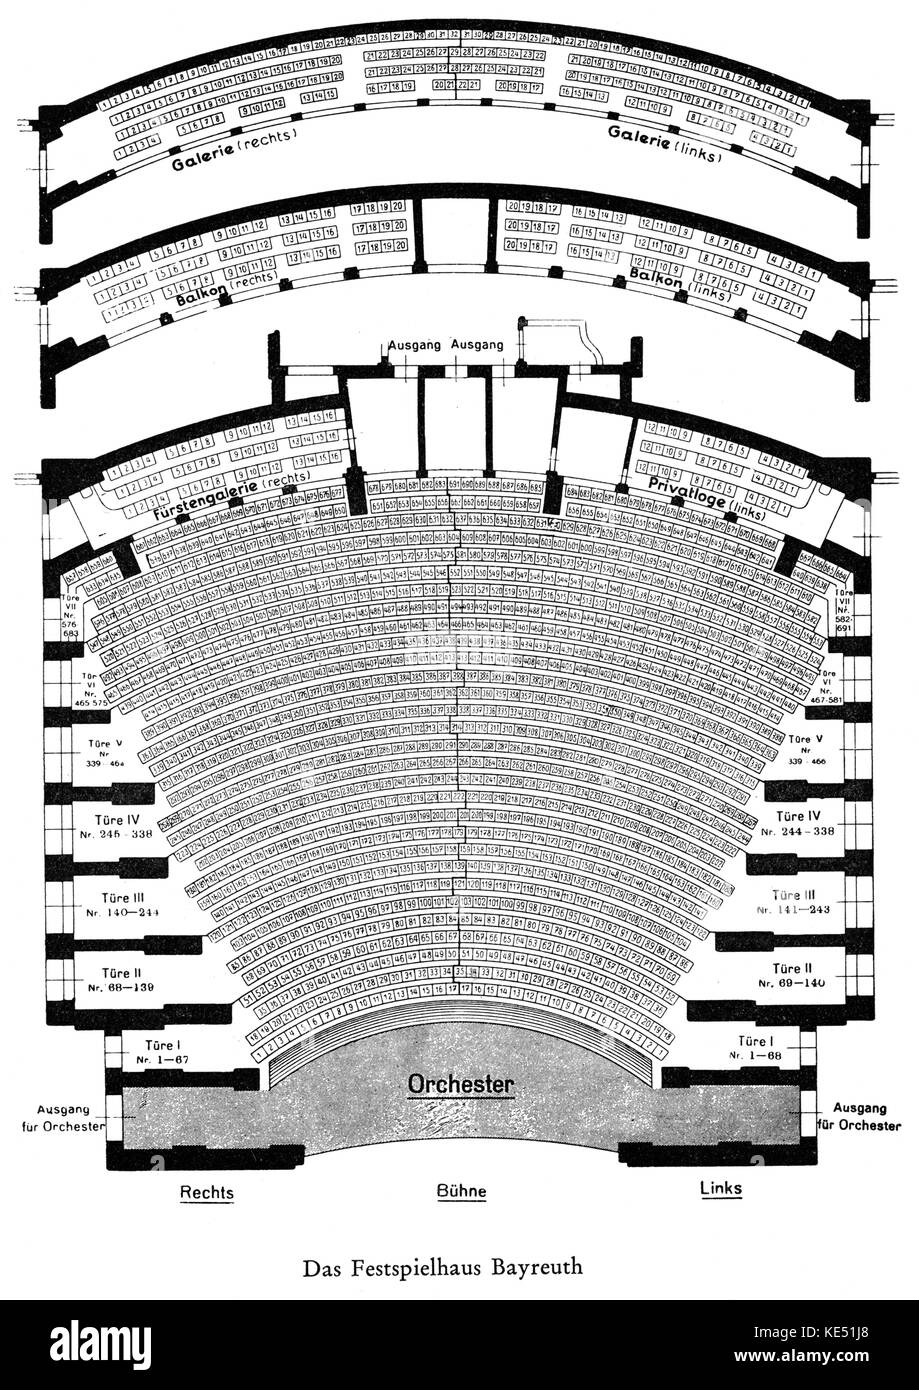 Bayreuth Festival House (Bayreuther Festspielhaus) - plan of the theatre. Late 1940 's. Gallery. Galleries. Theatre box. Boxes. Stage. Orchestra. Stock Photo